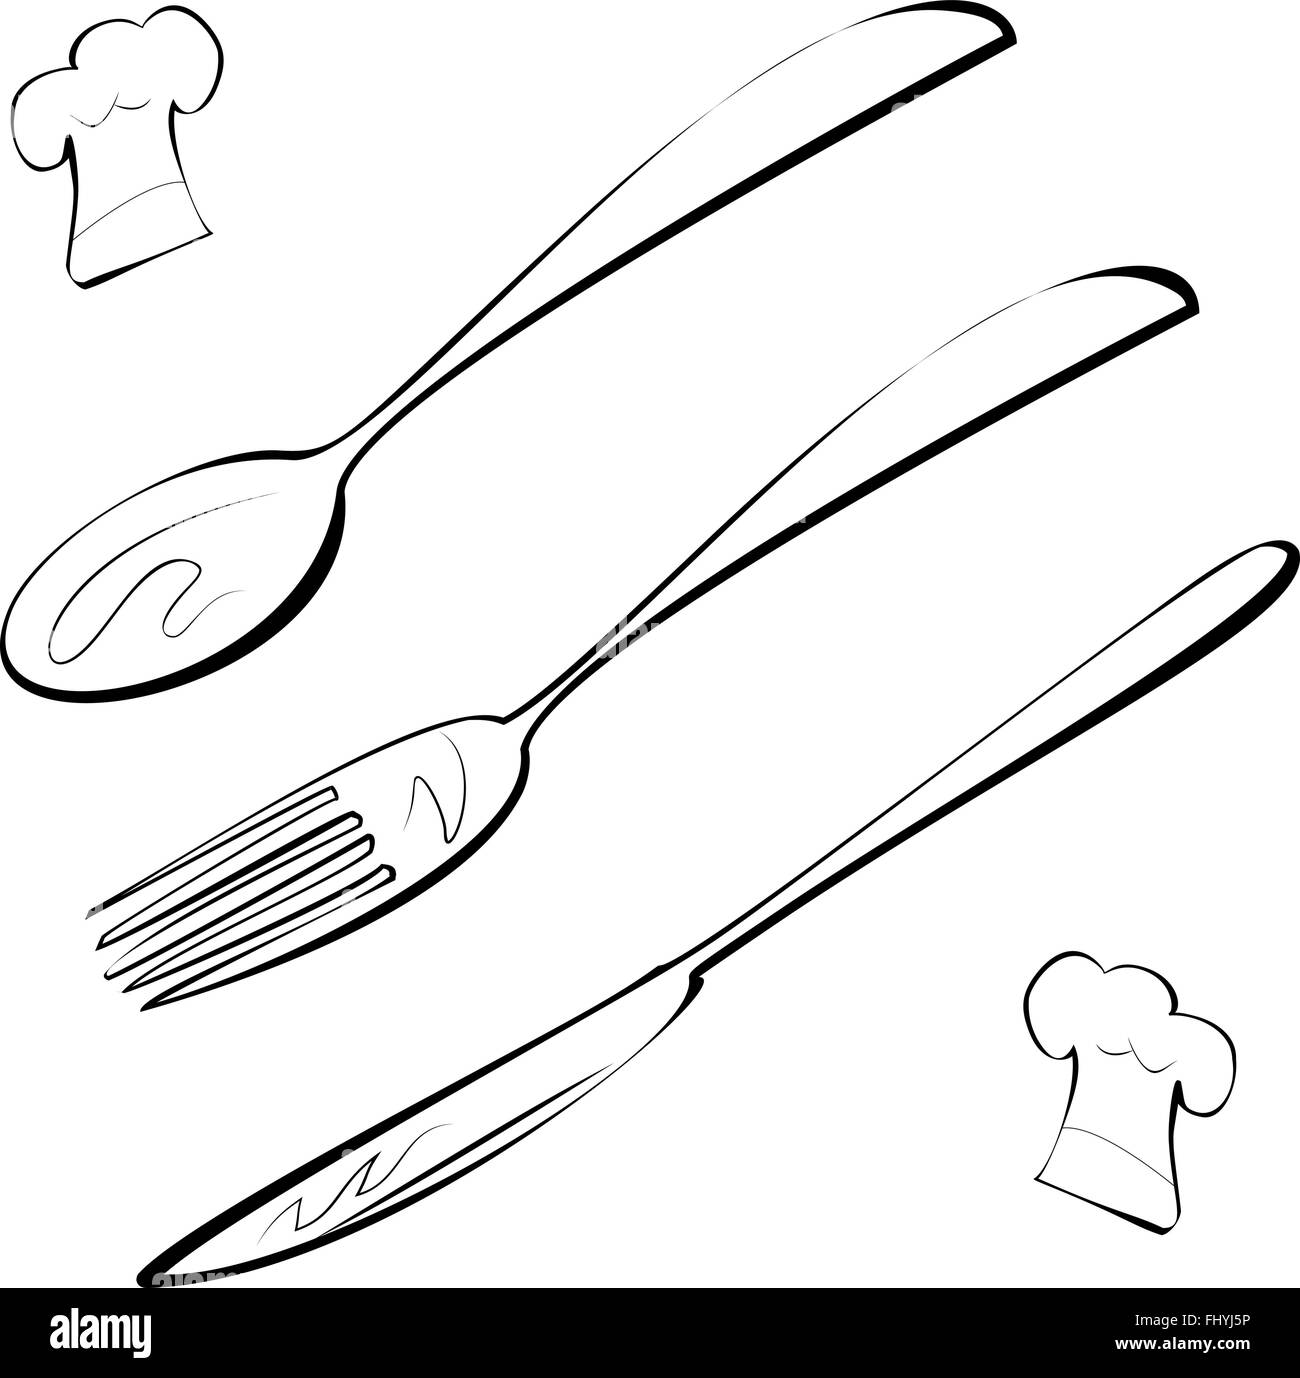 Cutlery, fork, knife, spoon, chef hat doodles, line art. Digital vector illustration isolated on white. Stock Vector